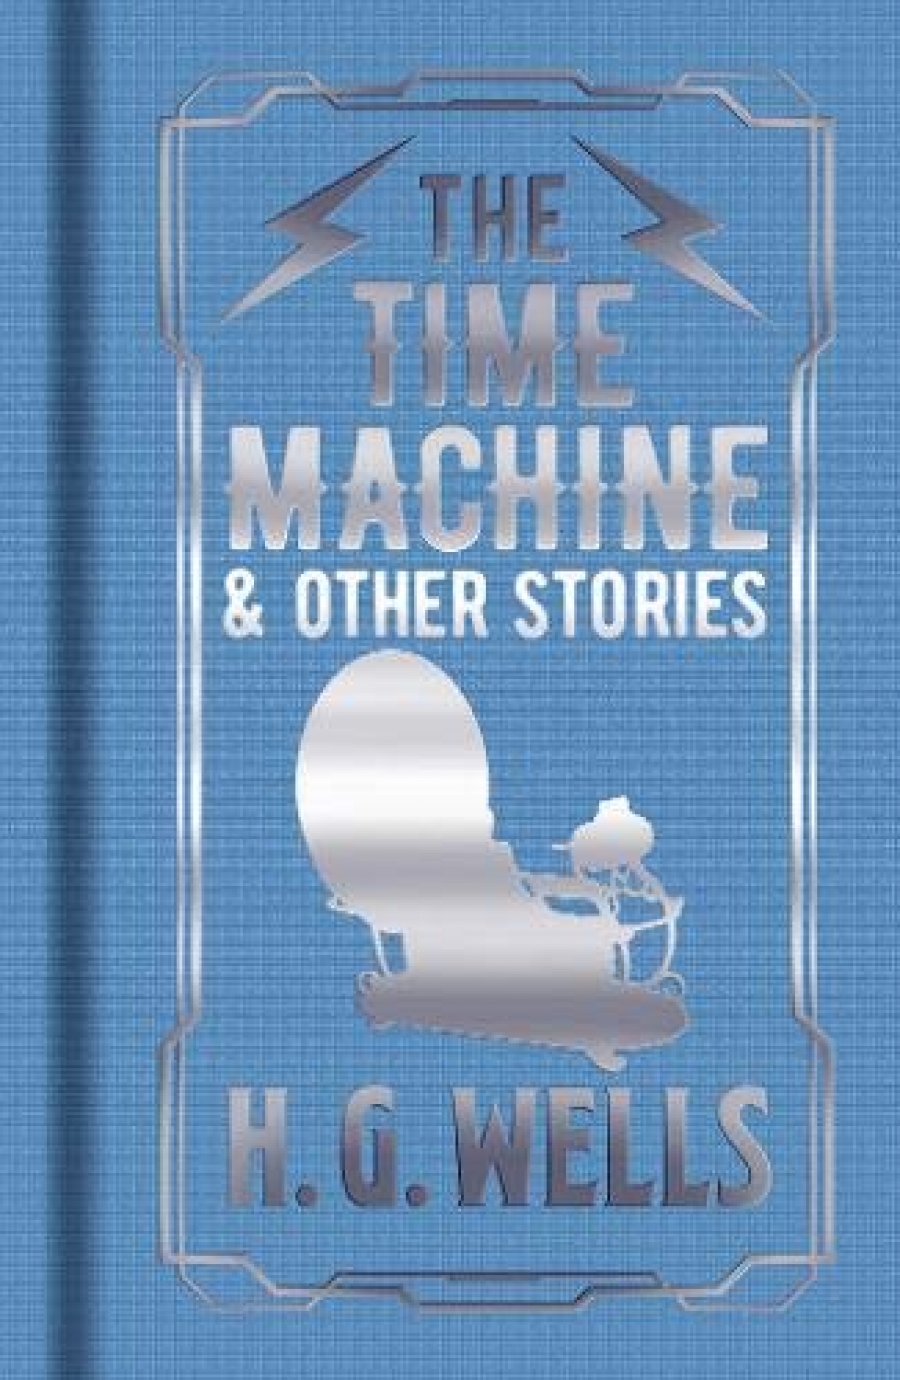 Wells H.G. The Time Machine & Other Stories 